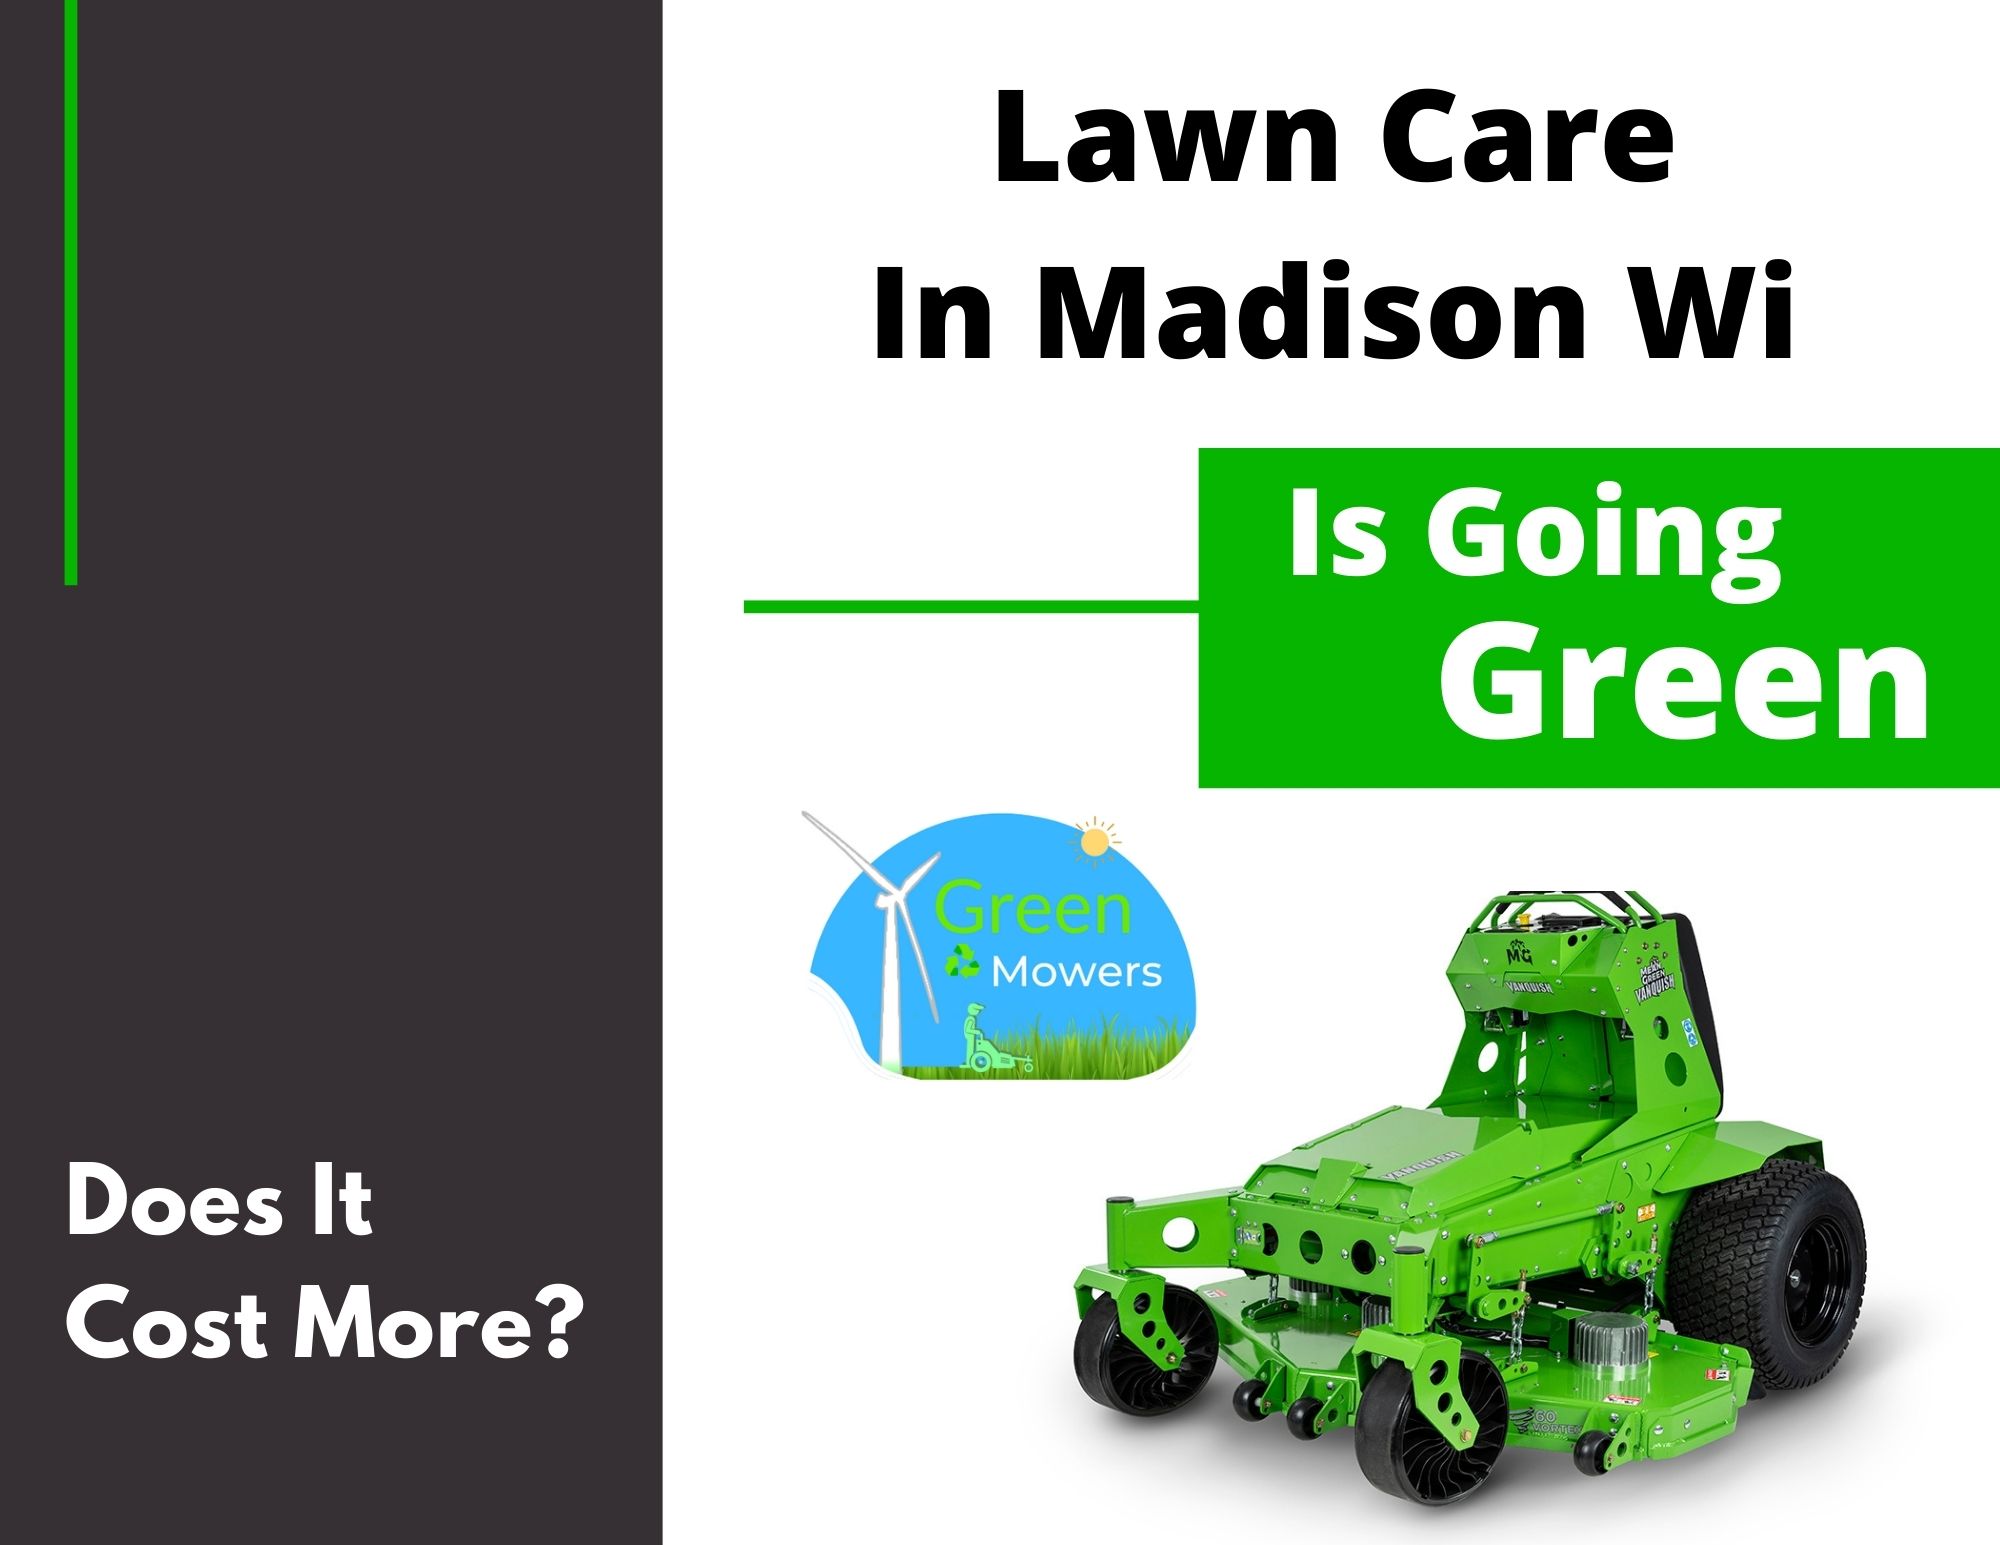 Madison Wisconsin is going green.